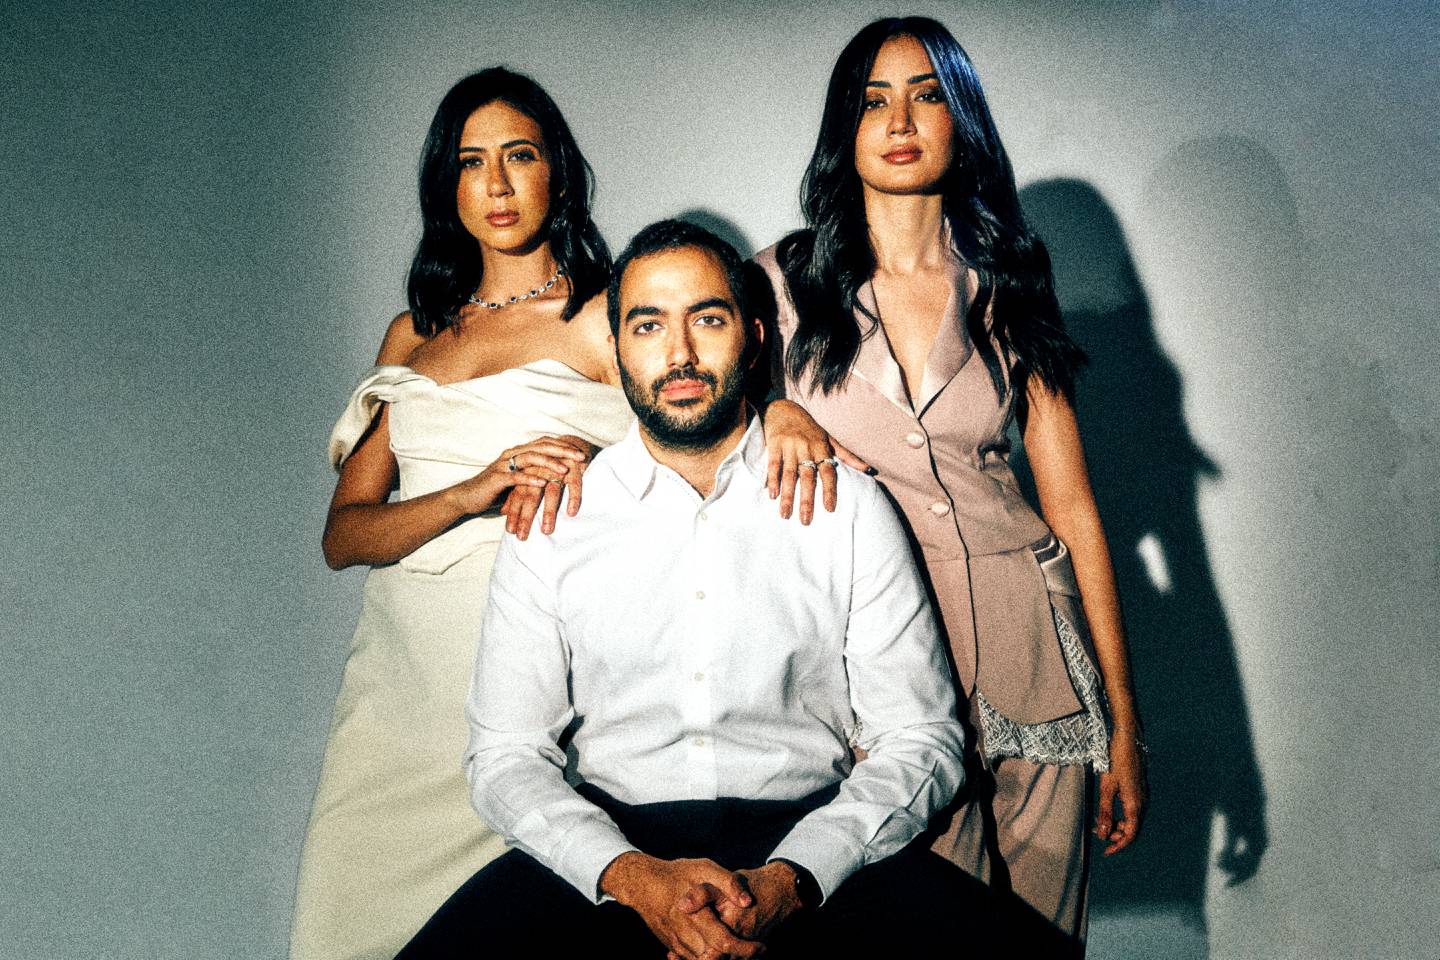 Sisters Mounaz and Aya Abdel Raouf founded the brand in 2014 and brother Mohamed Abdel Raouf is Okhtein's CEO. Okhtein